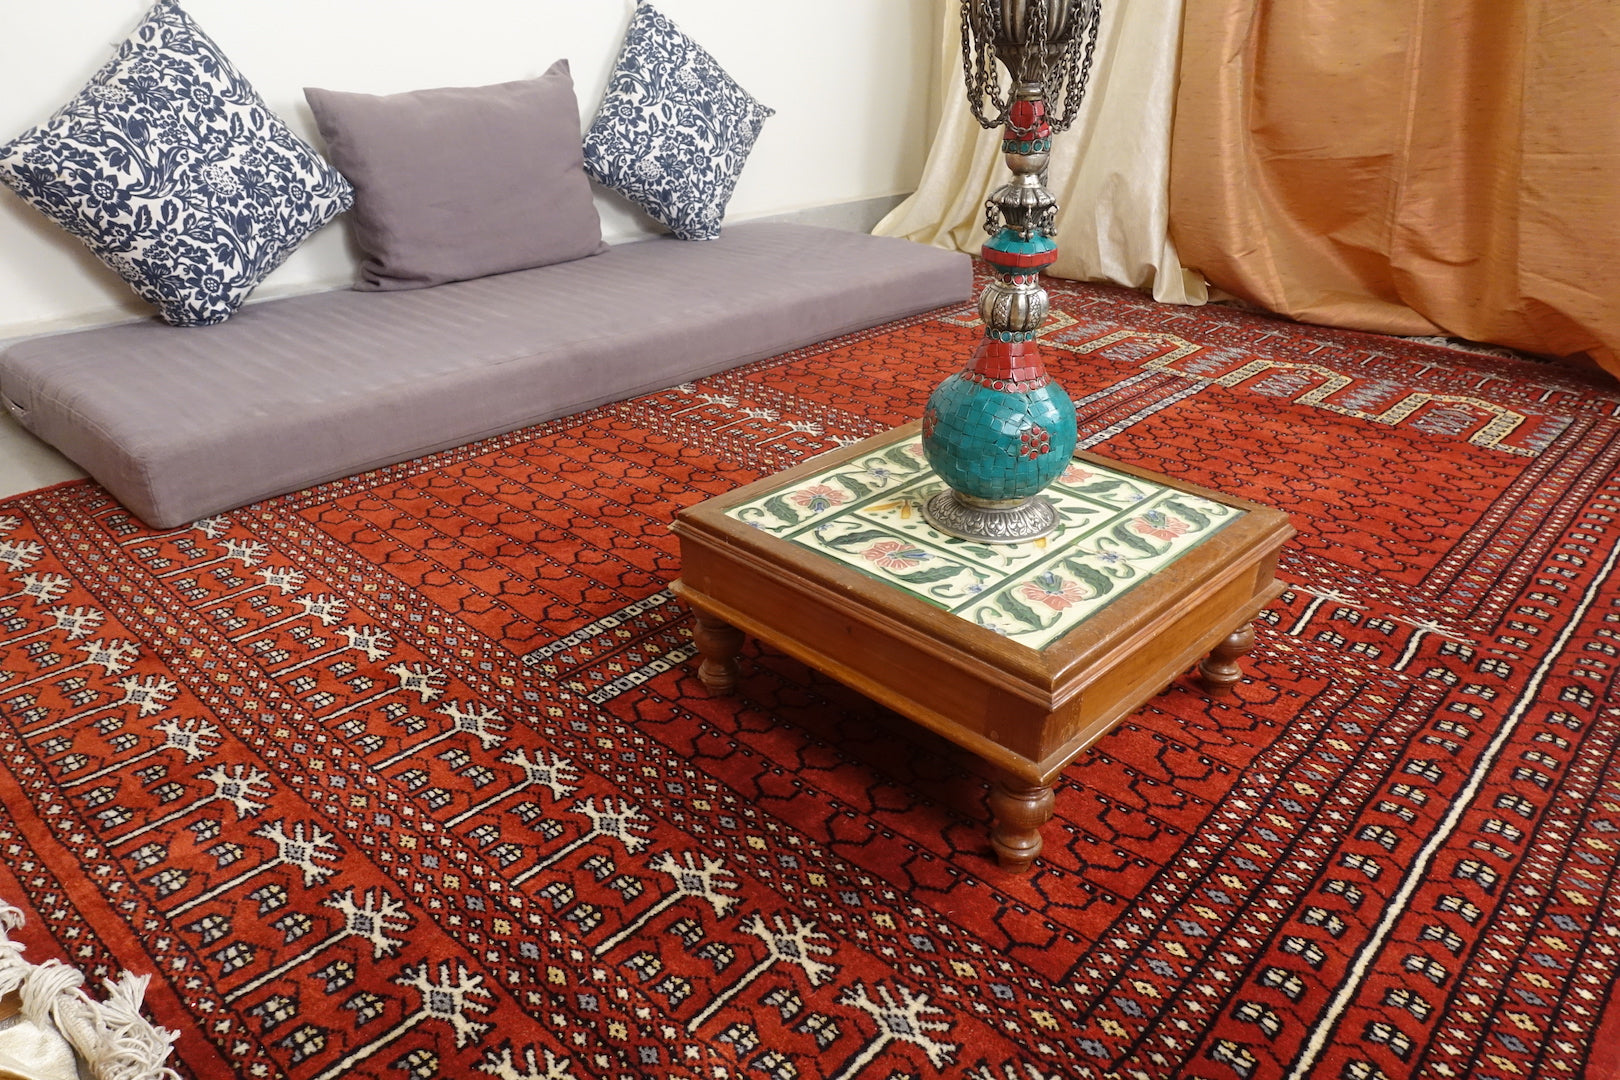 It is a 5 feet by 7 feet rug, the colours used are brick red, black, blue and beige.